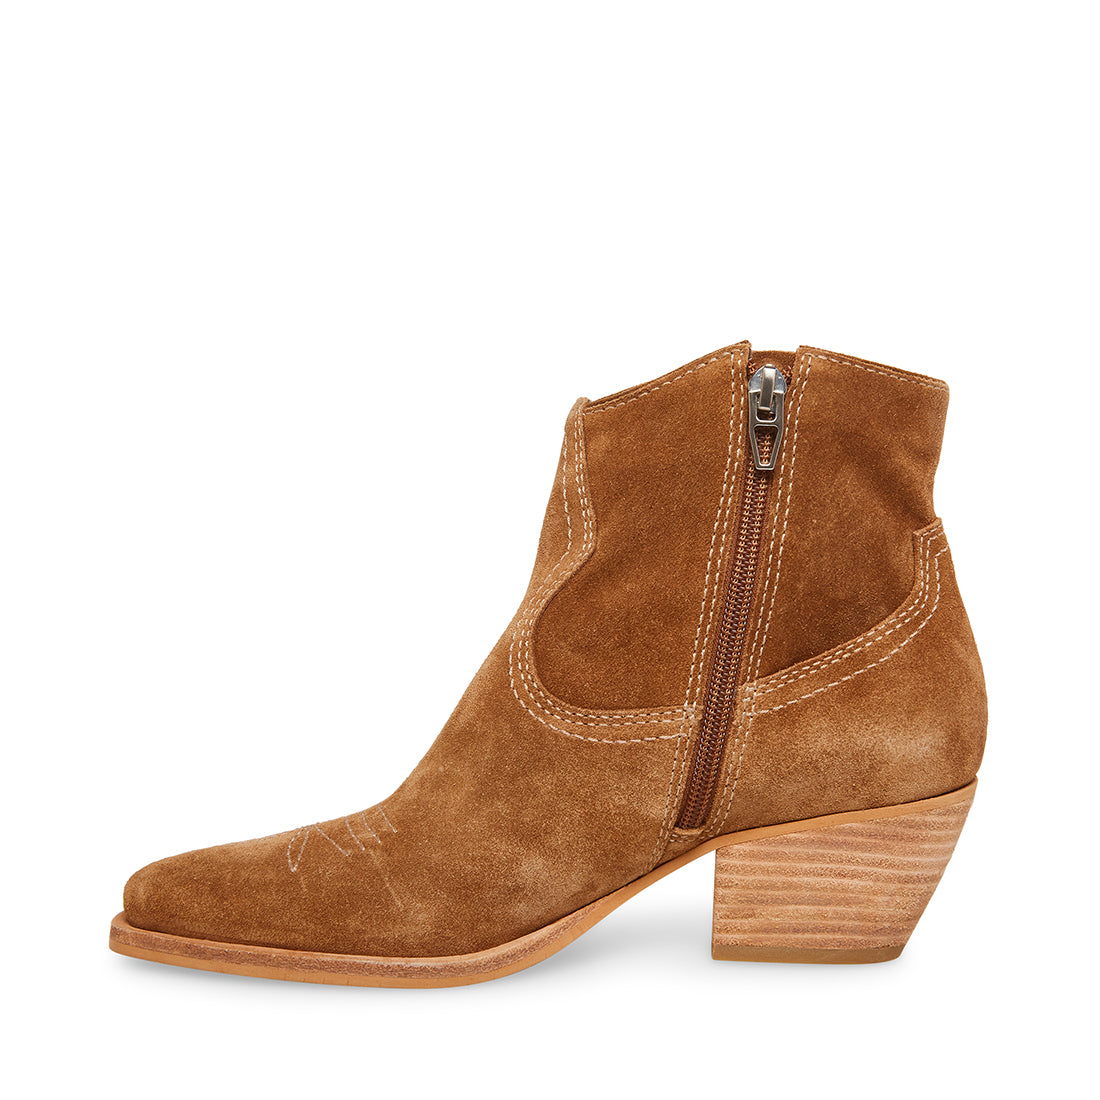 PERKINS TAUPE SUEDE – Steve Madden